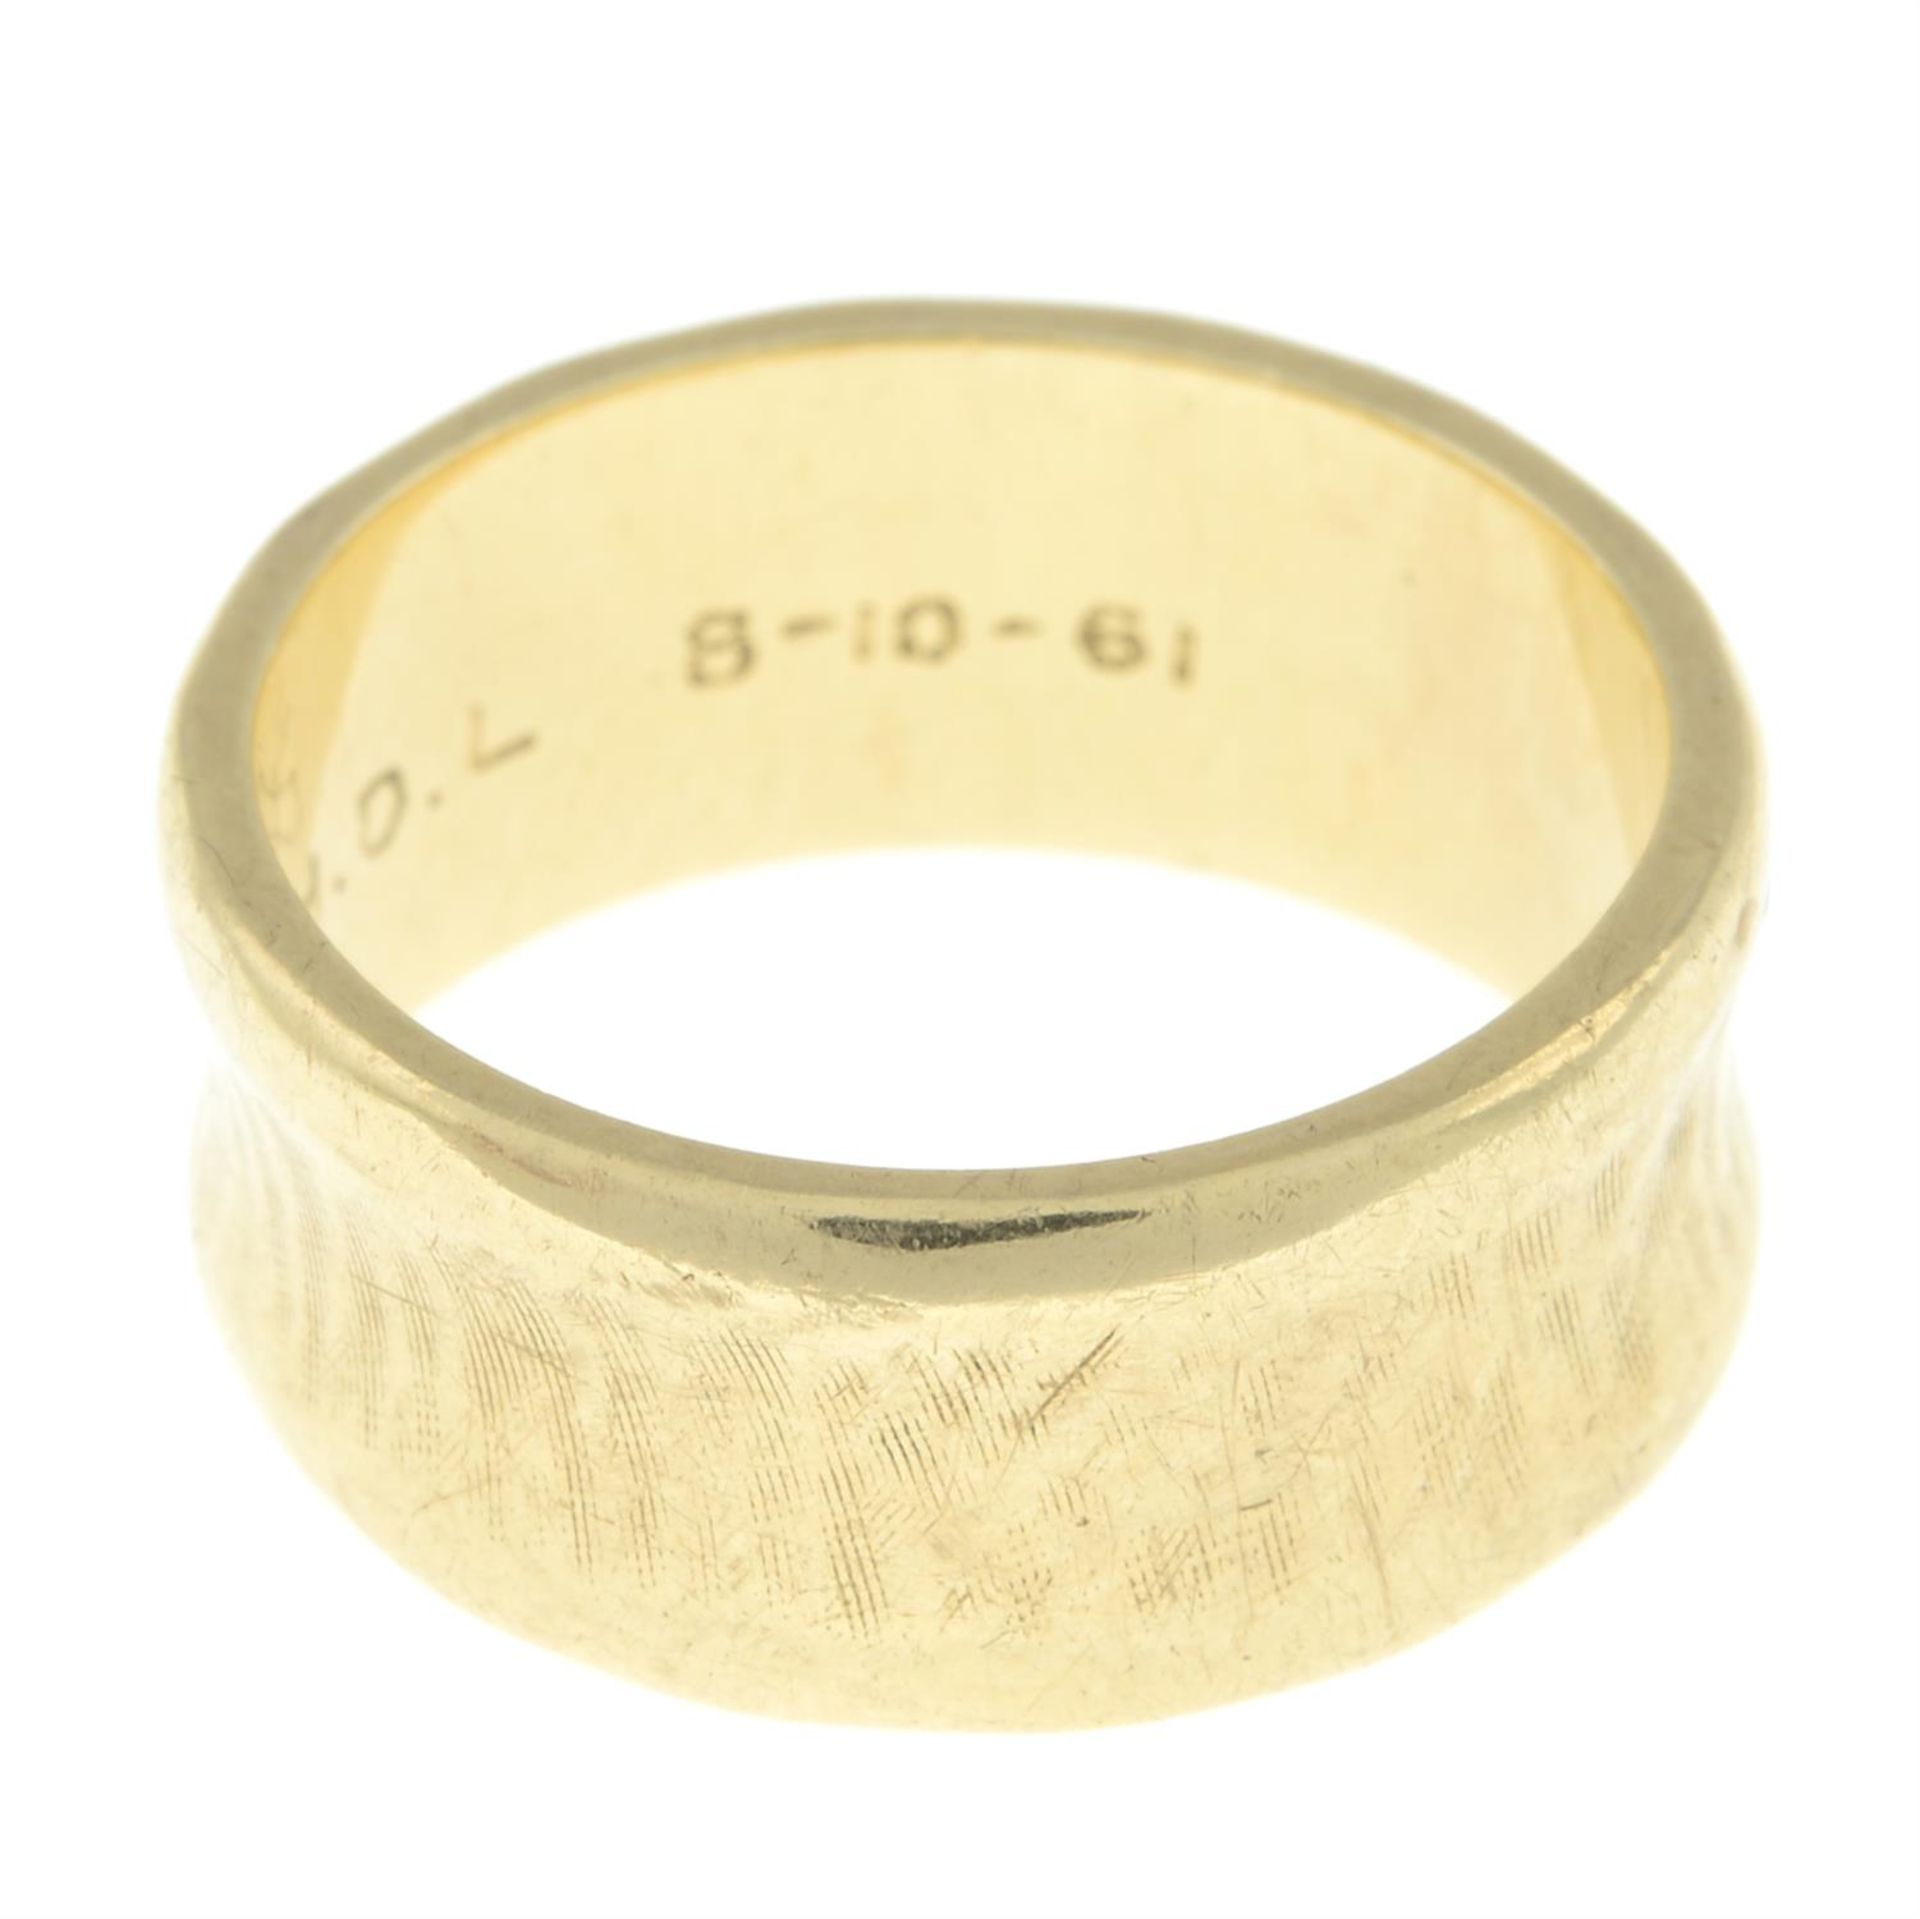 1960s 14ct gold ring, by Cartier - Image 4 of 5